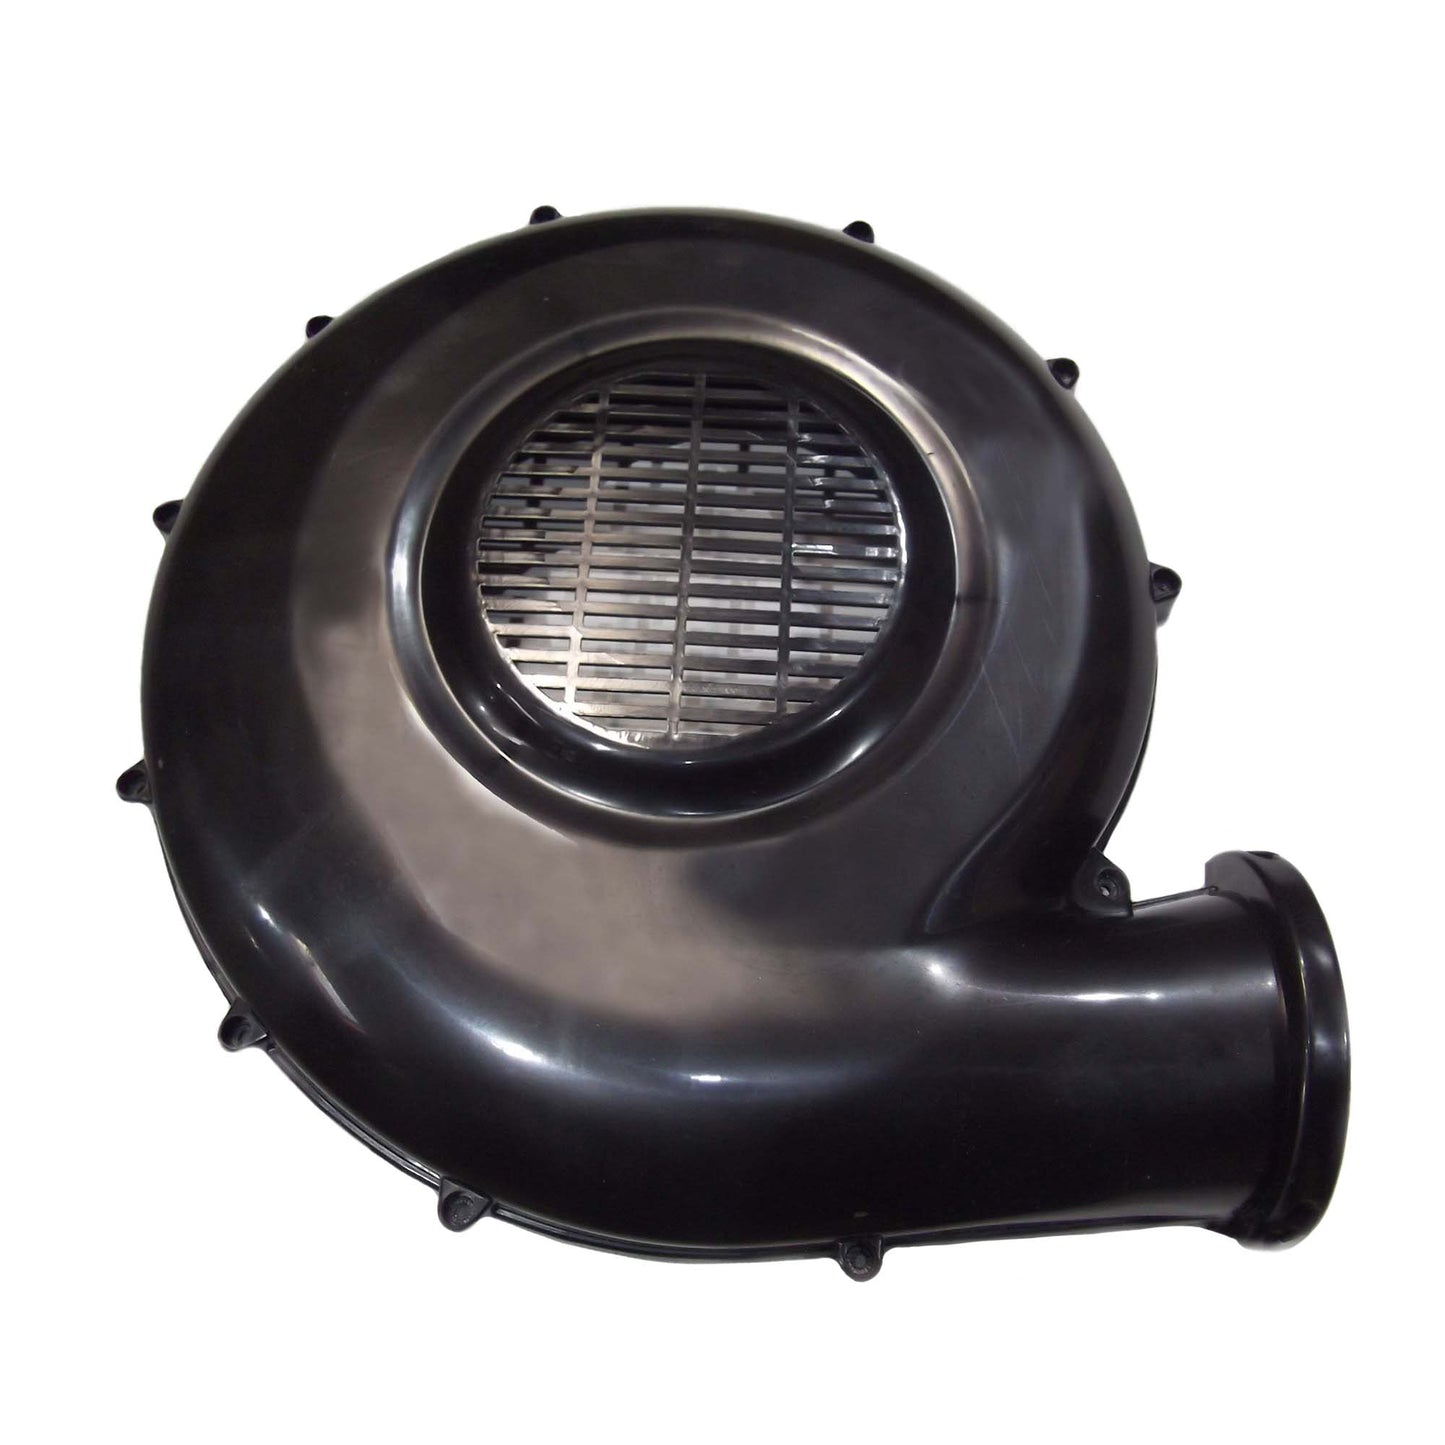 Top Cover for BR-35 Inflatable Blower